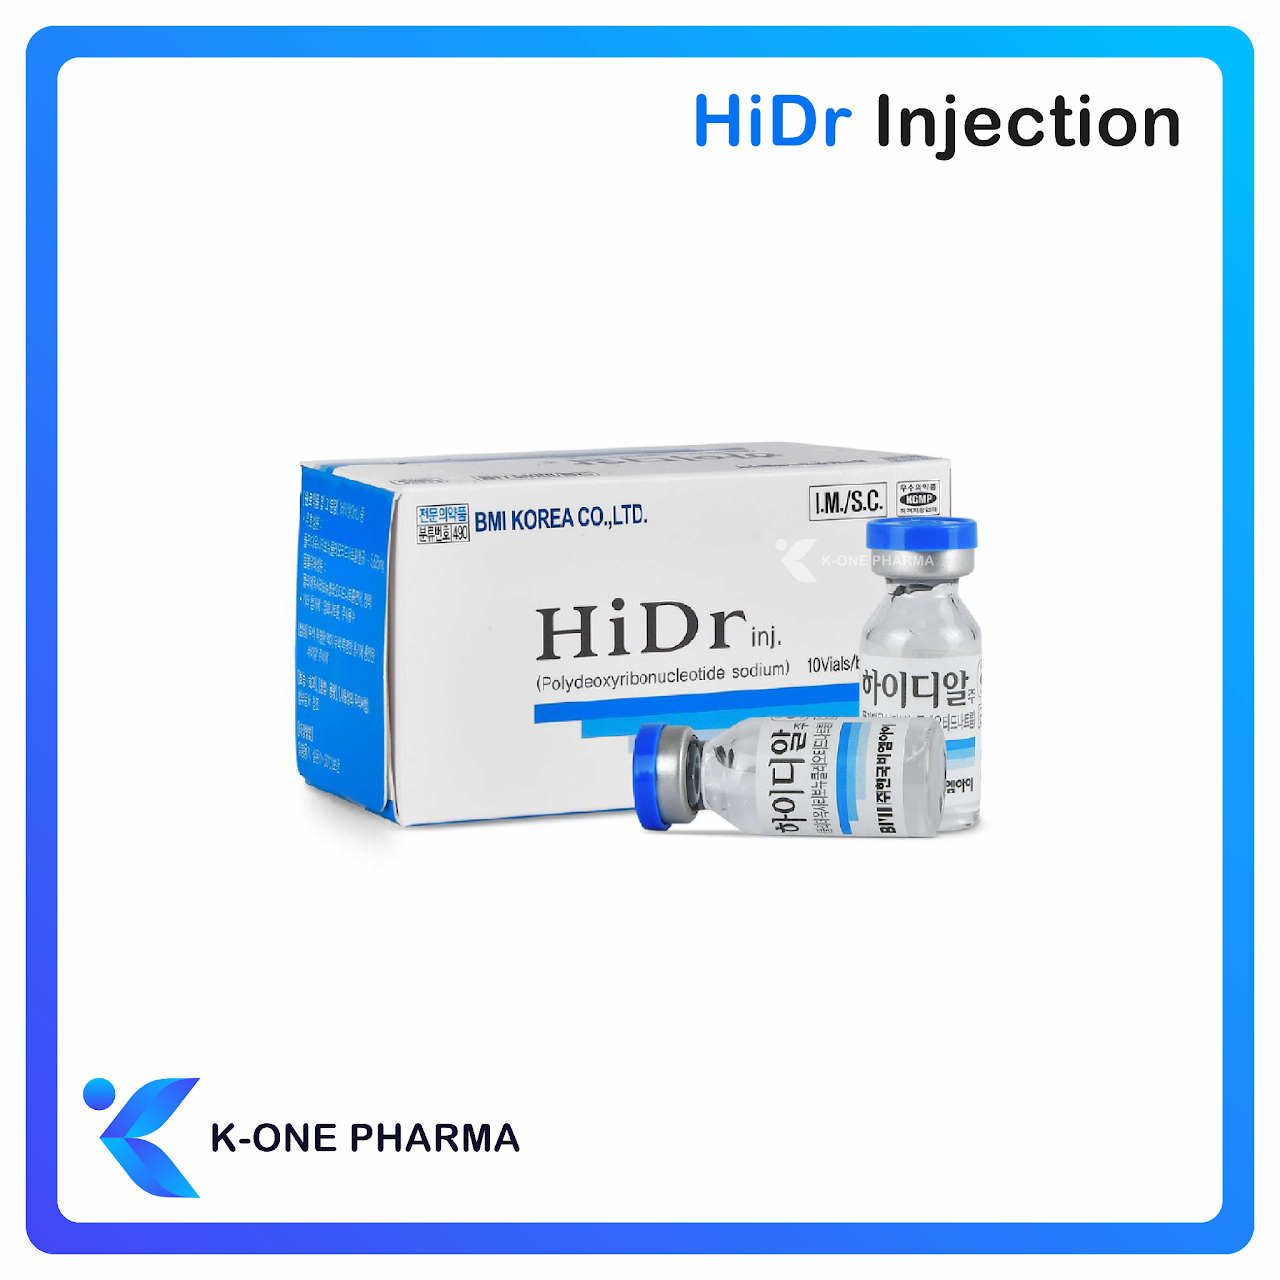 HiDr INJECTION Skin Repair Vitamin_enriched beauty skin care